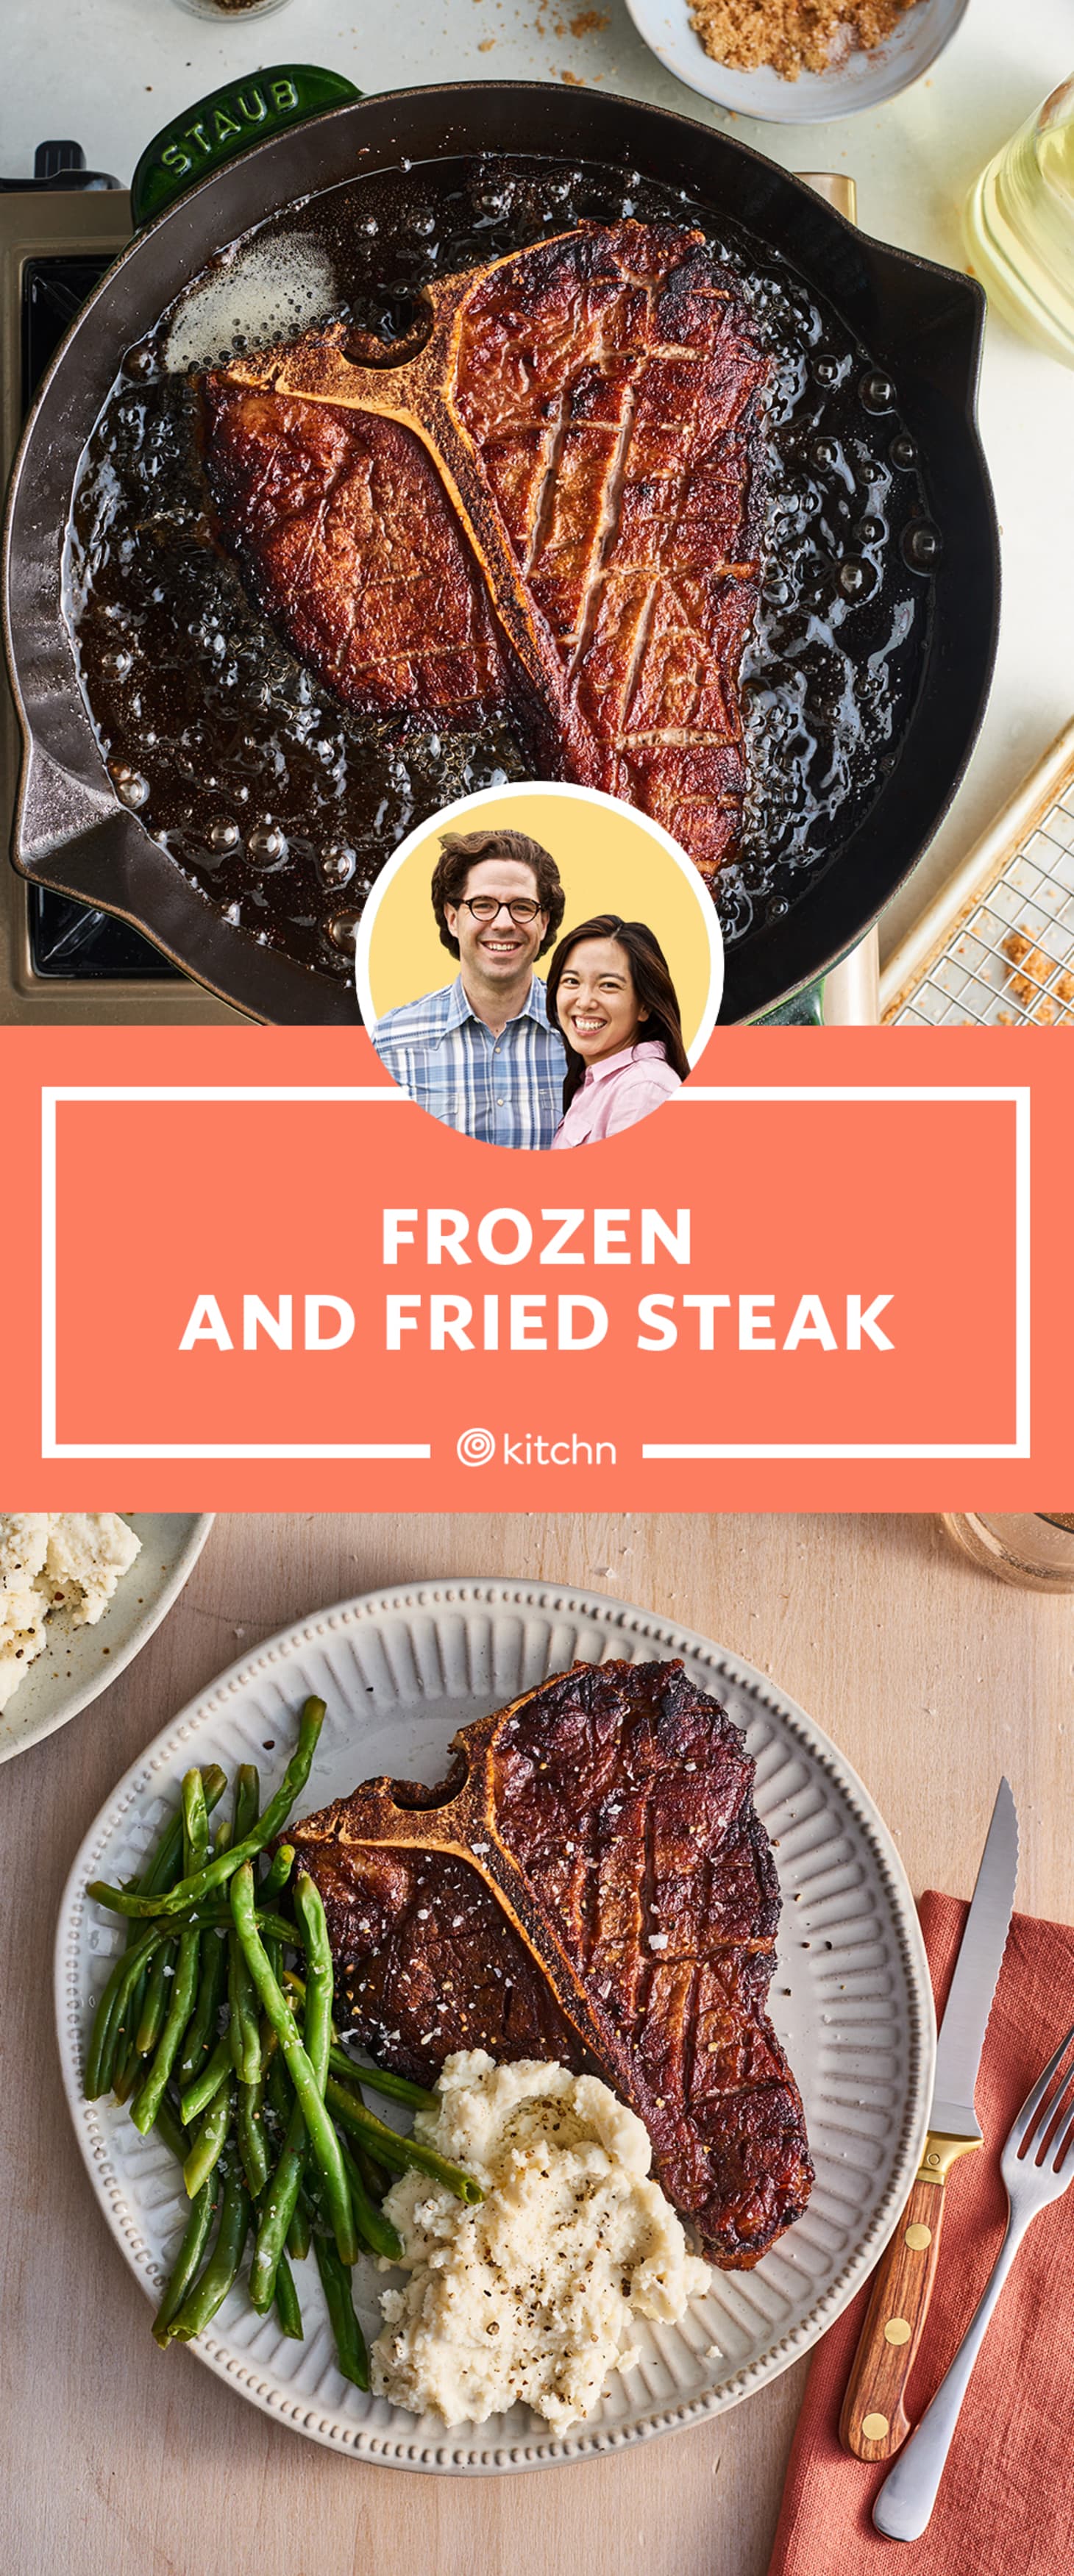 How to Cook Frozen Steak - Freeze Fried Steak Review | Kitchn